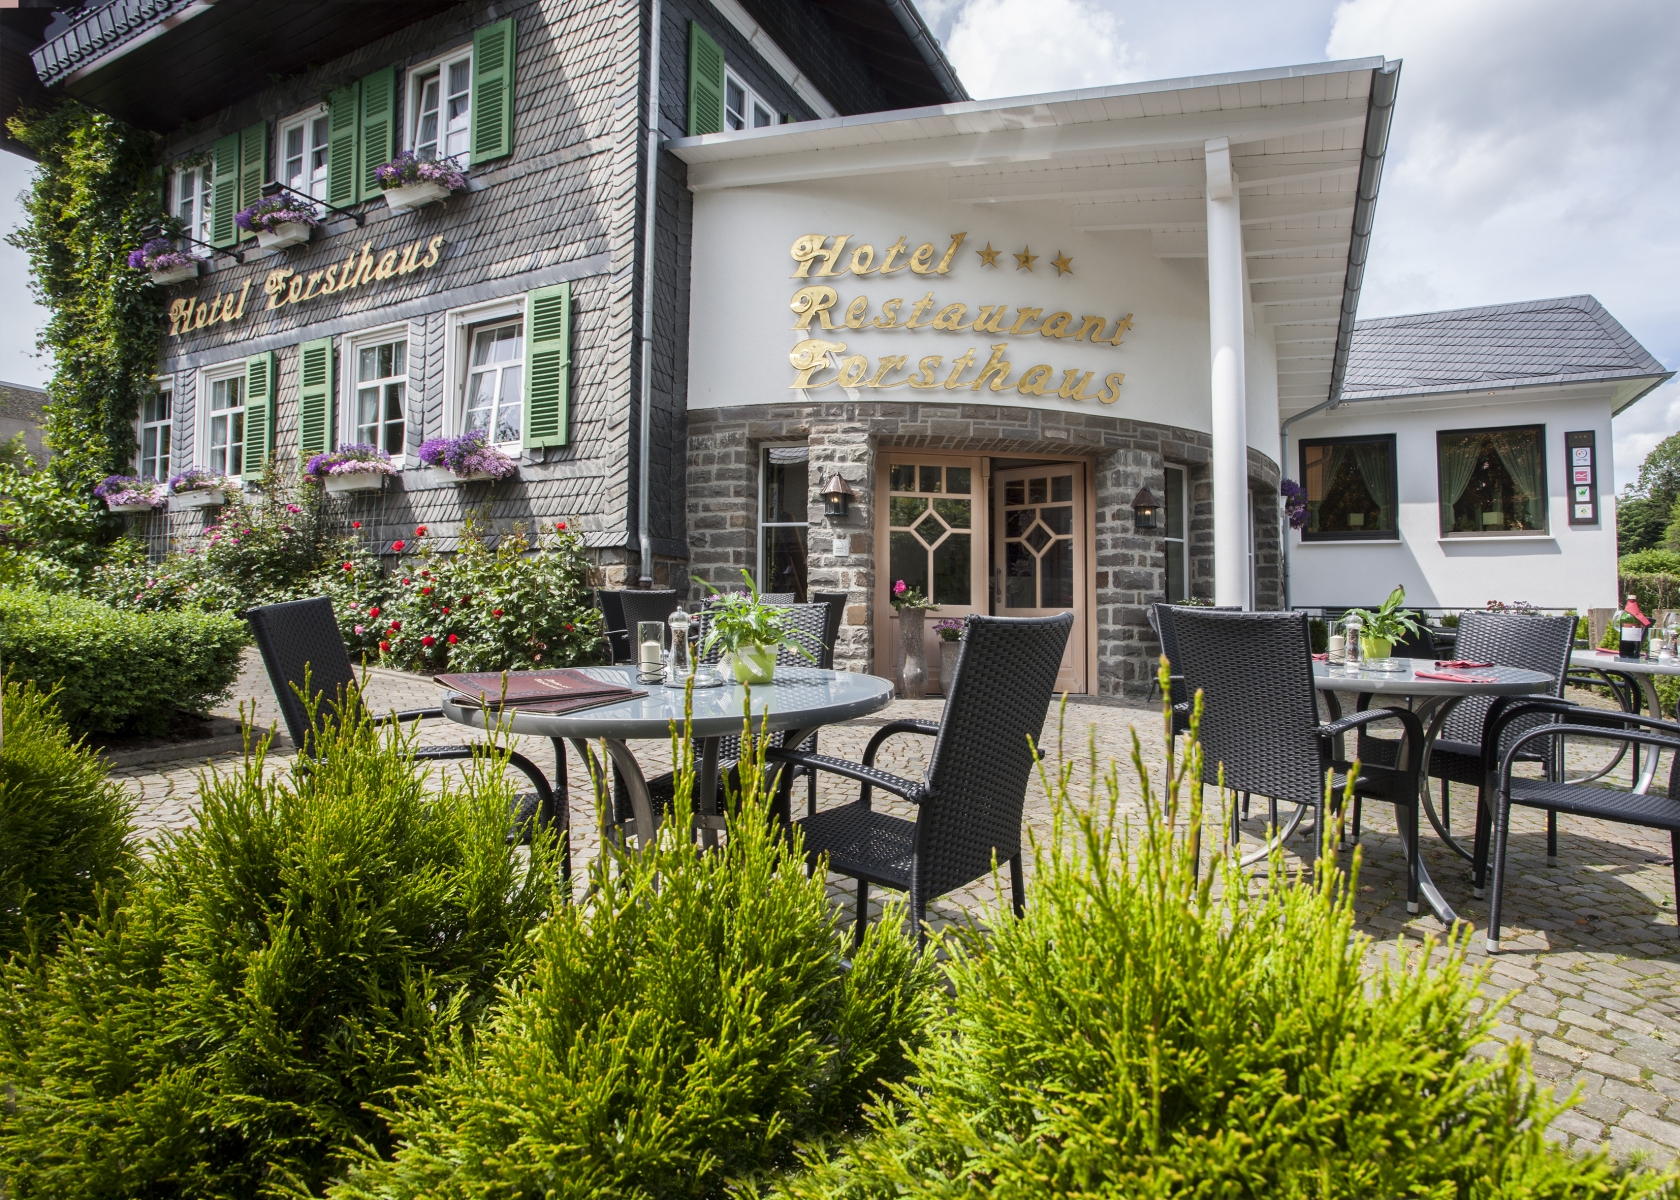 Hotel Forsthaus Winterberg <br/>63.00 ew <br/> <a href='http://vakantieoplossing.nl/outpage/?id=3445b94ad777cd4e4653931944e2a110' target='_blank'>View Details</a>